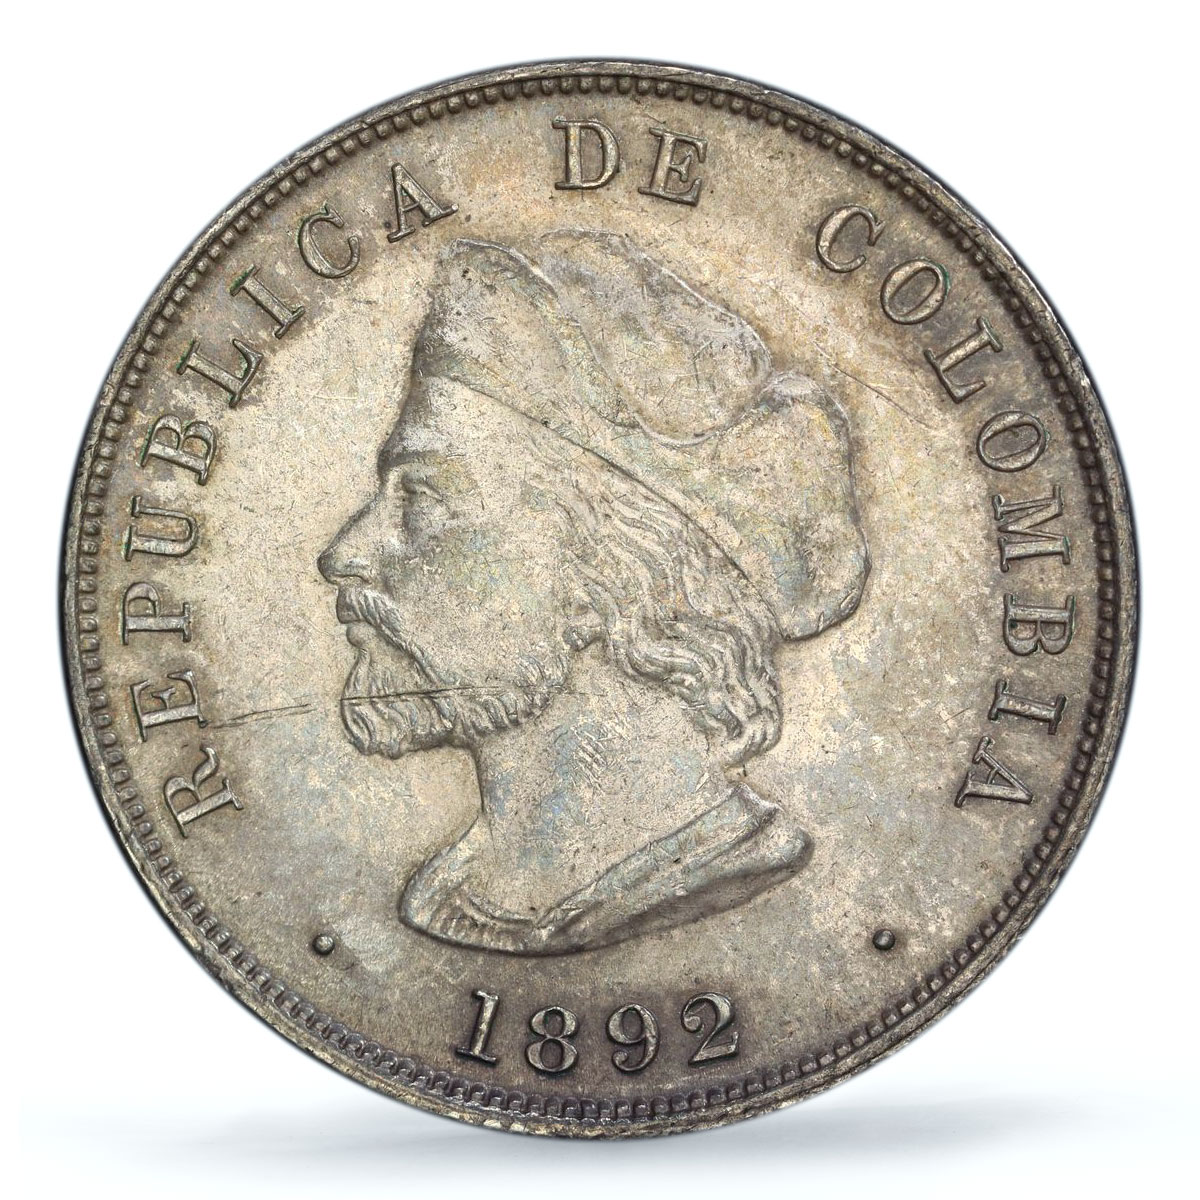 Colombia 50C Columbus America Discovery Right A KM-187.2 AU58 PCGS Ag coin 1892